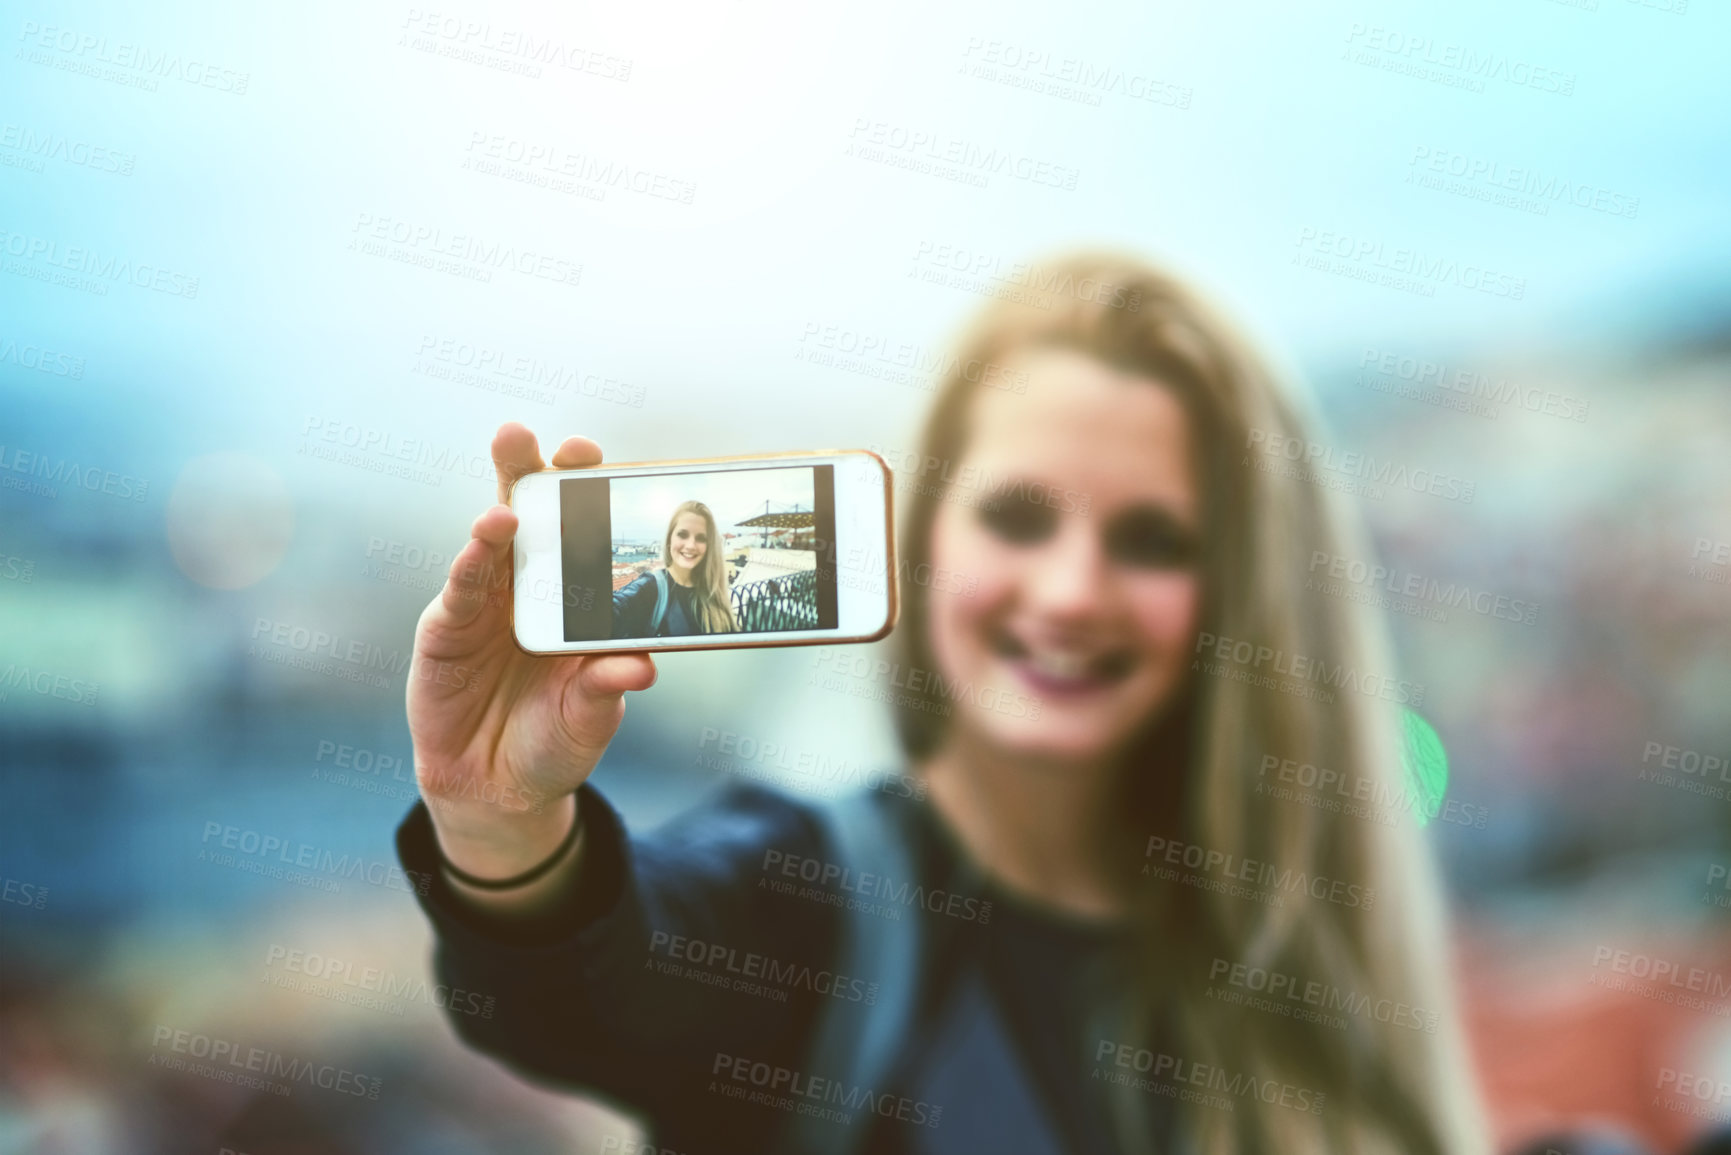 Buy stock photo Shot of a young woman using a cellphone to take selfies in the city